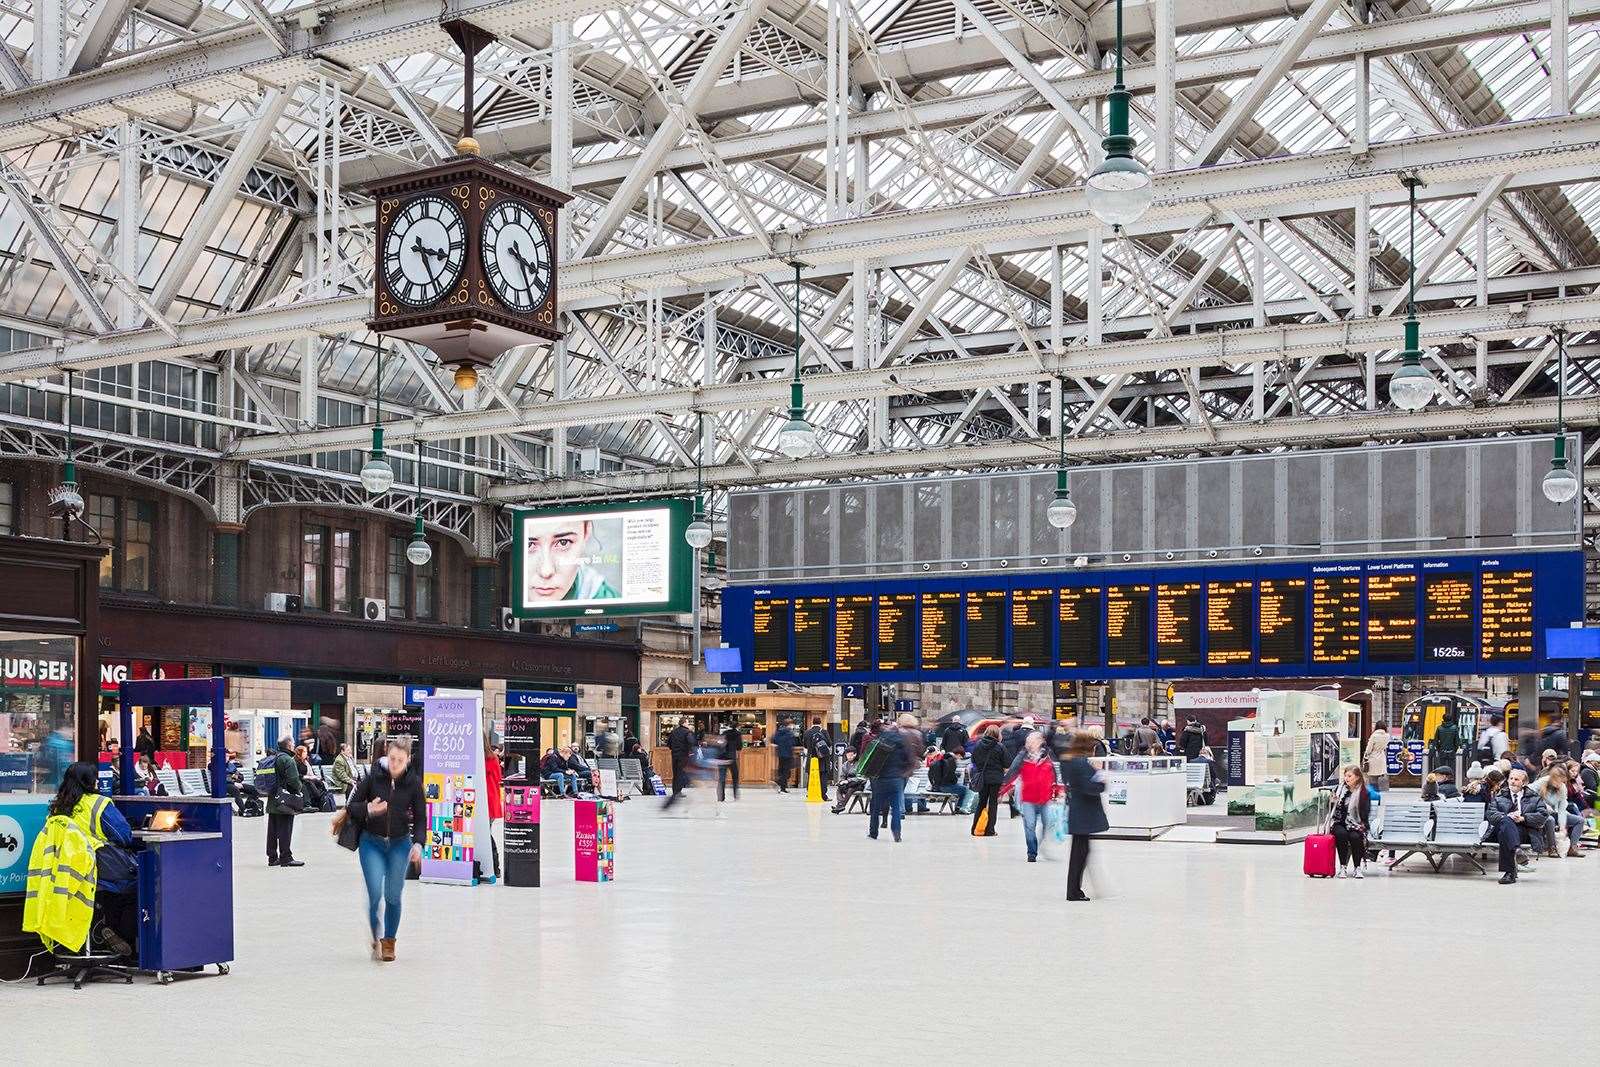 Train commuters across the UK will face major travel disruption this weekend.